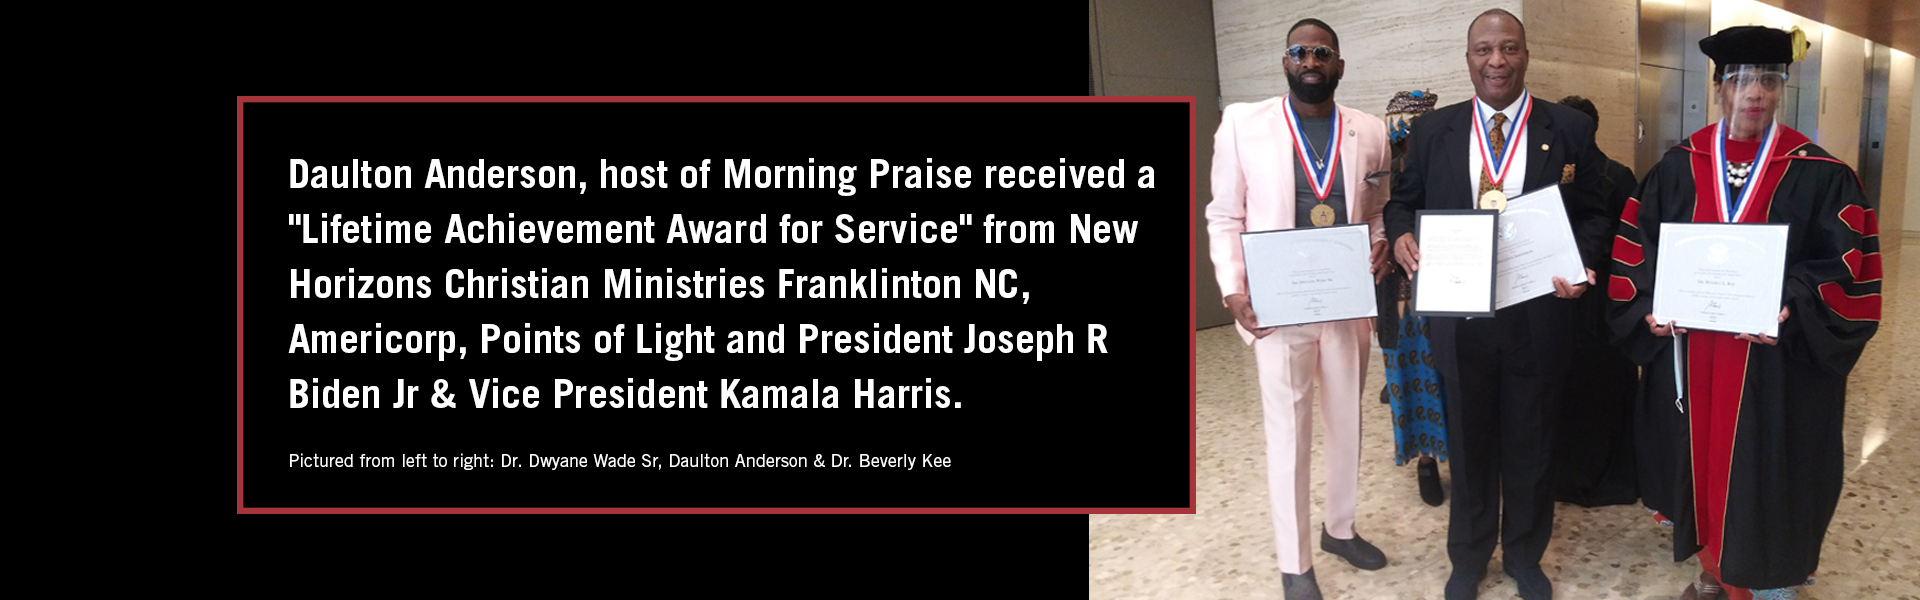 Daulton Anderson, host of Morning Praise received a "Lifetime Achievement Award for Service" from New Horizons Christian Ministries Franklinton NC, Americorp, Points of Light and President Joseph R Biden Jr & Vice President Kamala Harris